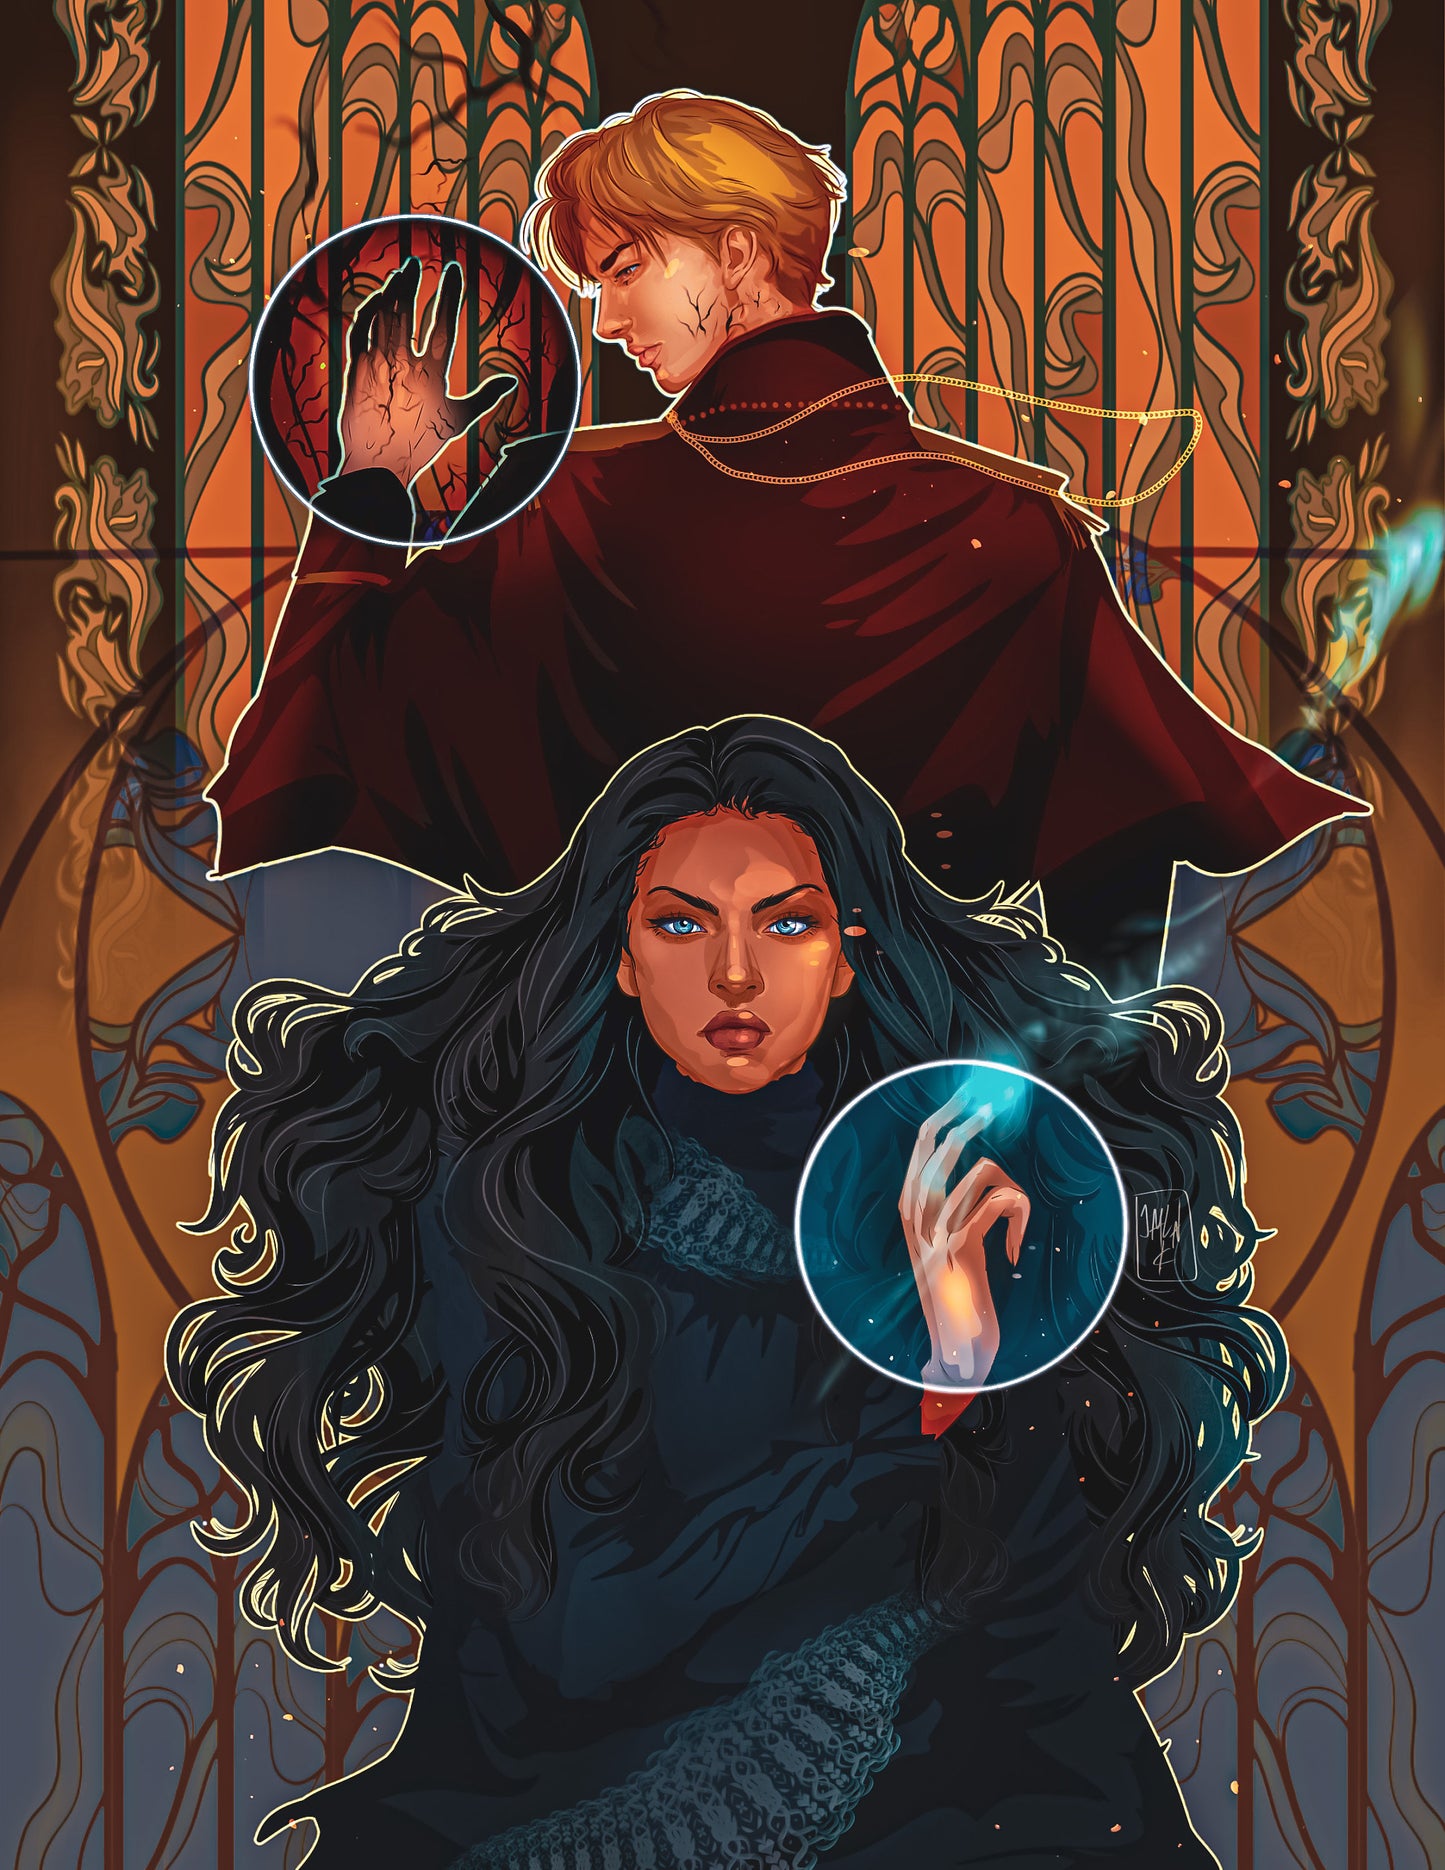 5x7 Art Print Grishaverse Six of Crows King and Queen of Ravka Zoya and Nikolai